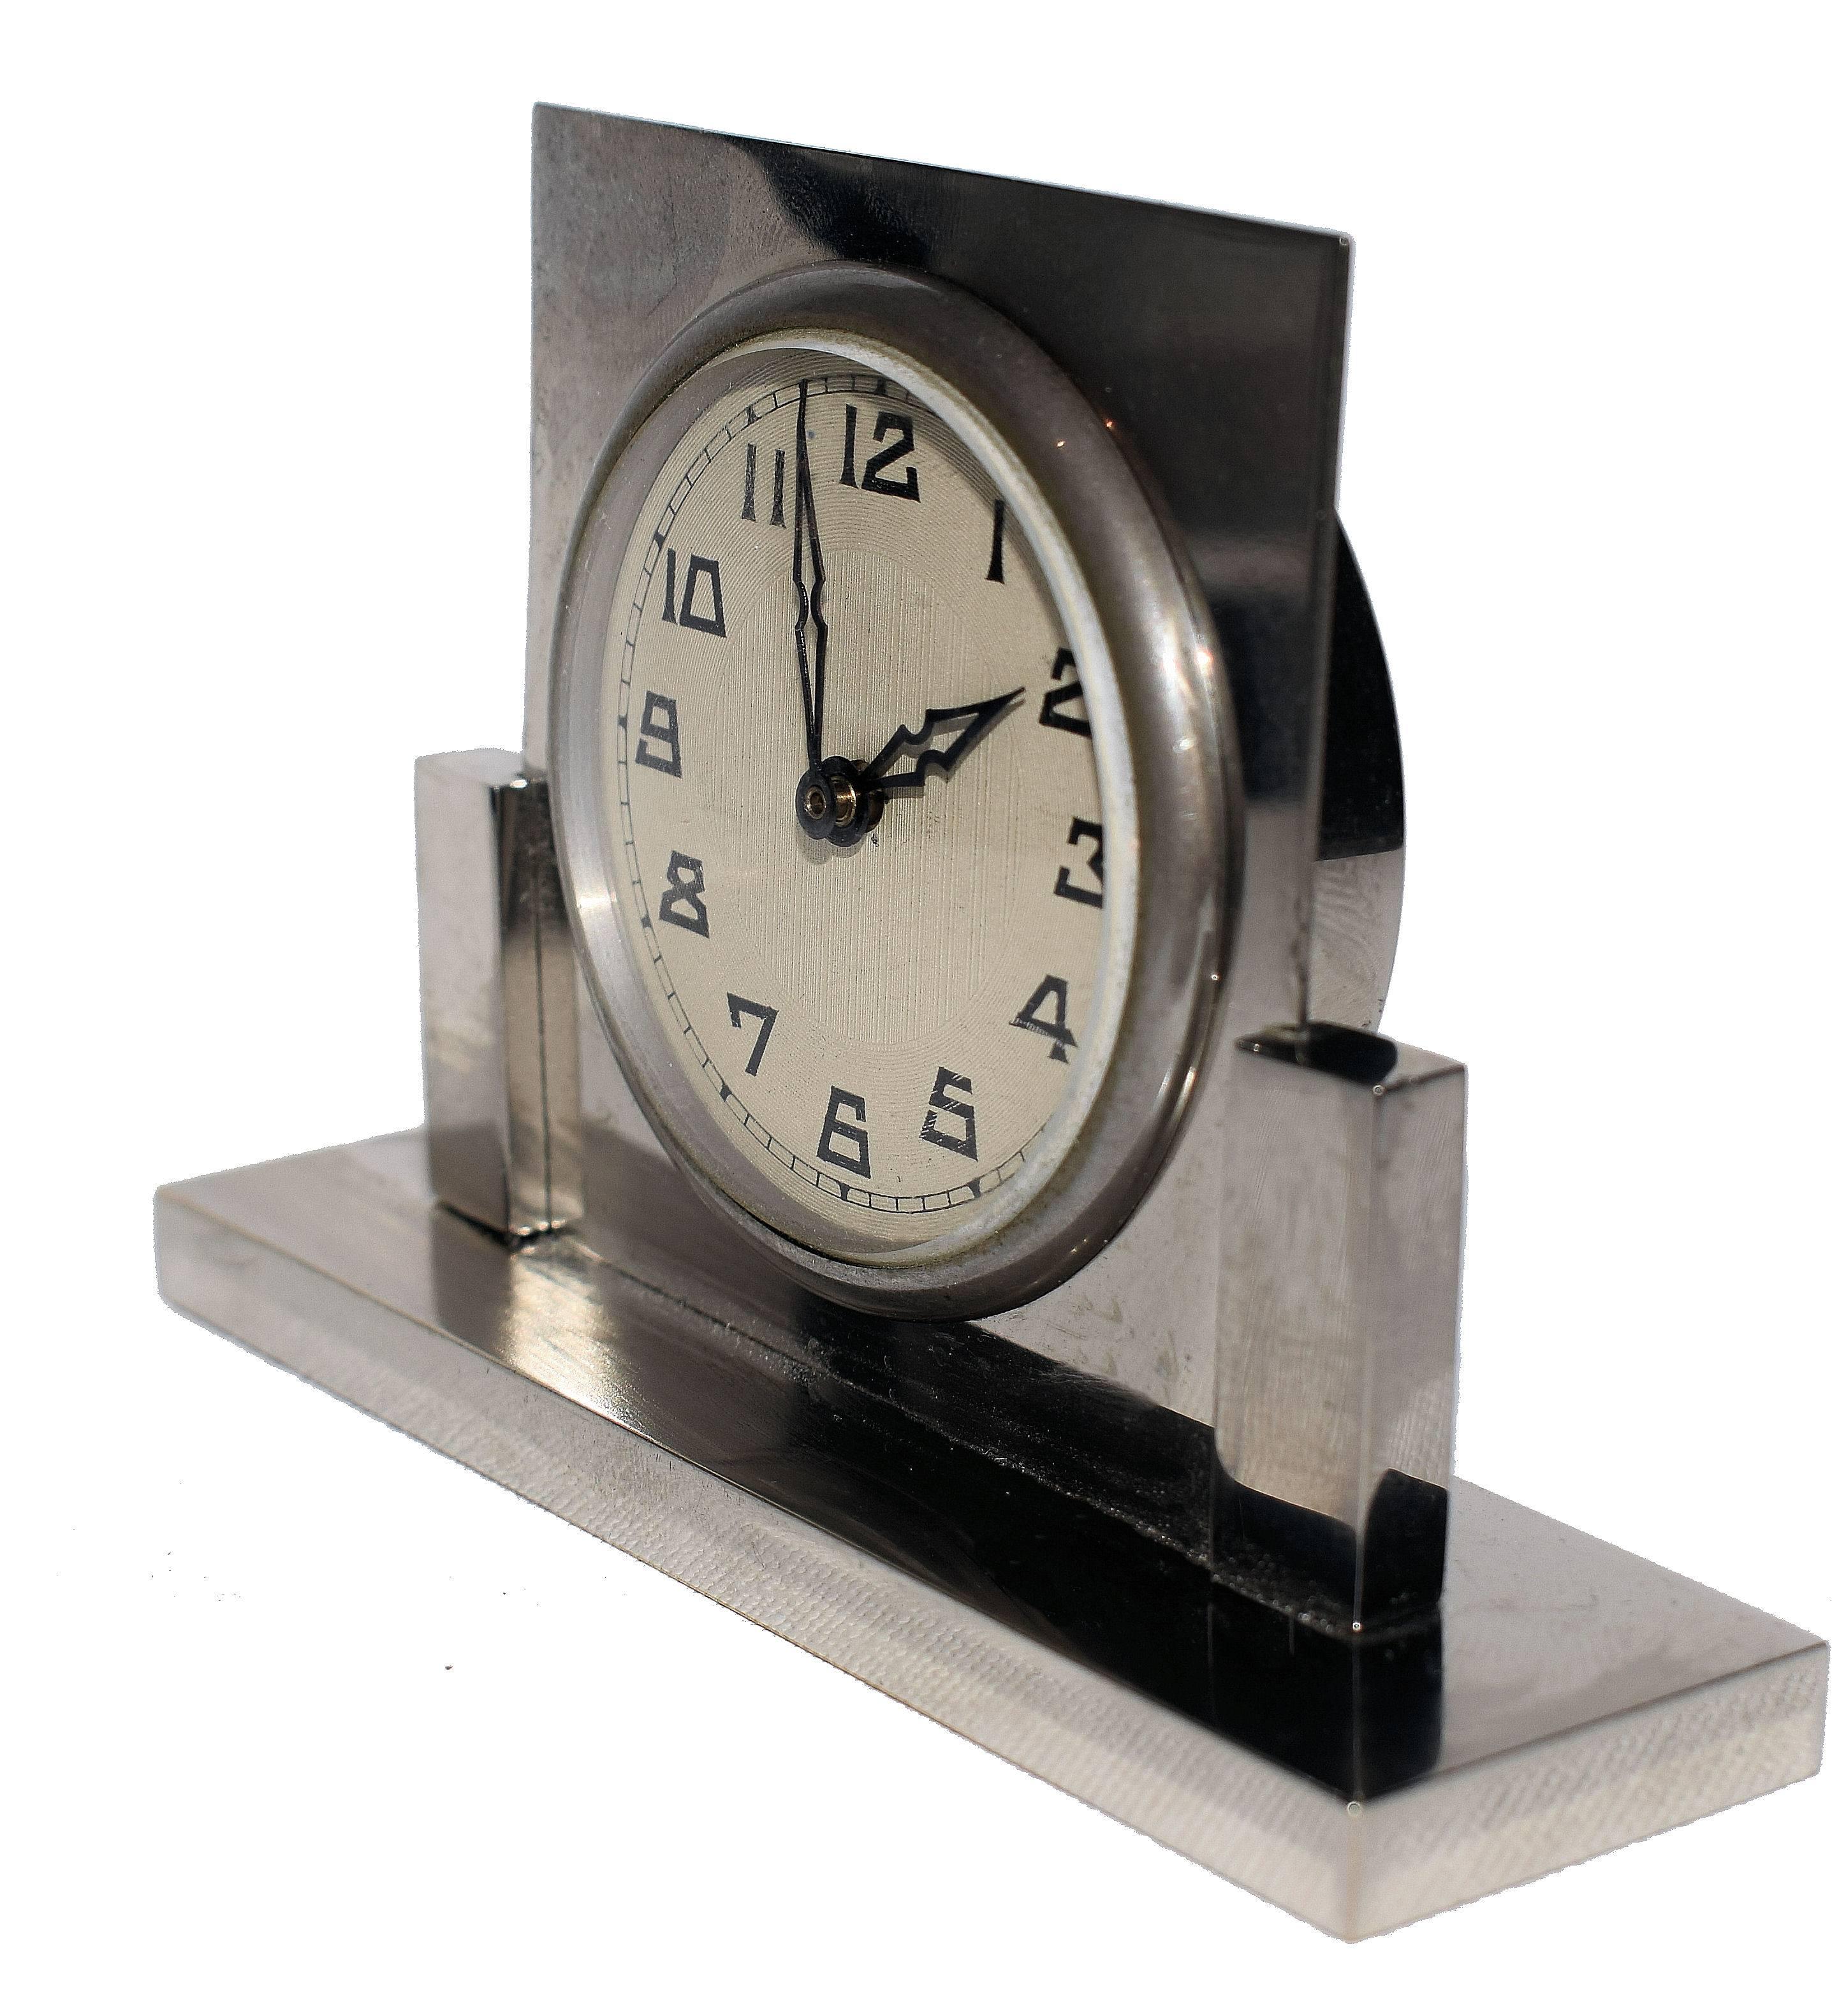 Fabulous little miniature alarm clock, please see dimensions below to see how delightfully small this clock is. This clock is very well preserved for its 90 odd years, a beautiful object in its own right aside it's functionality. Have to say it's